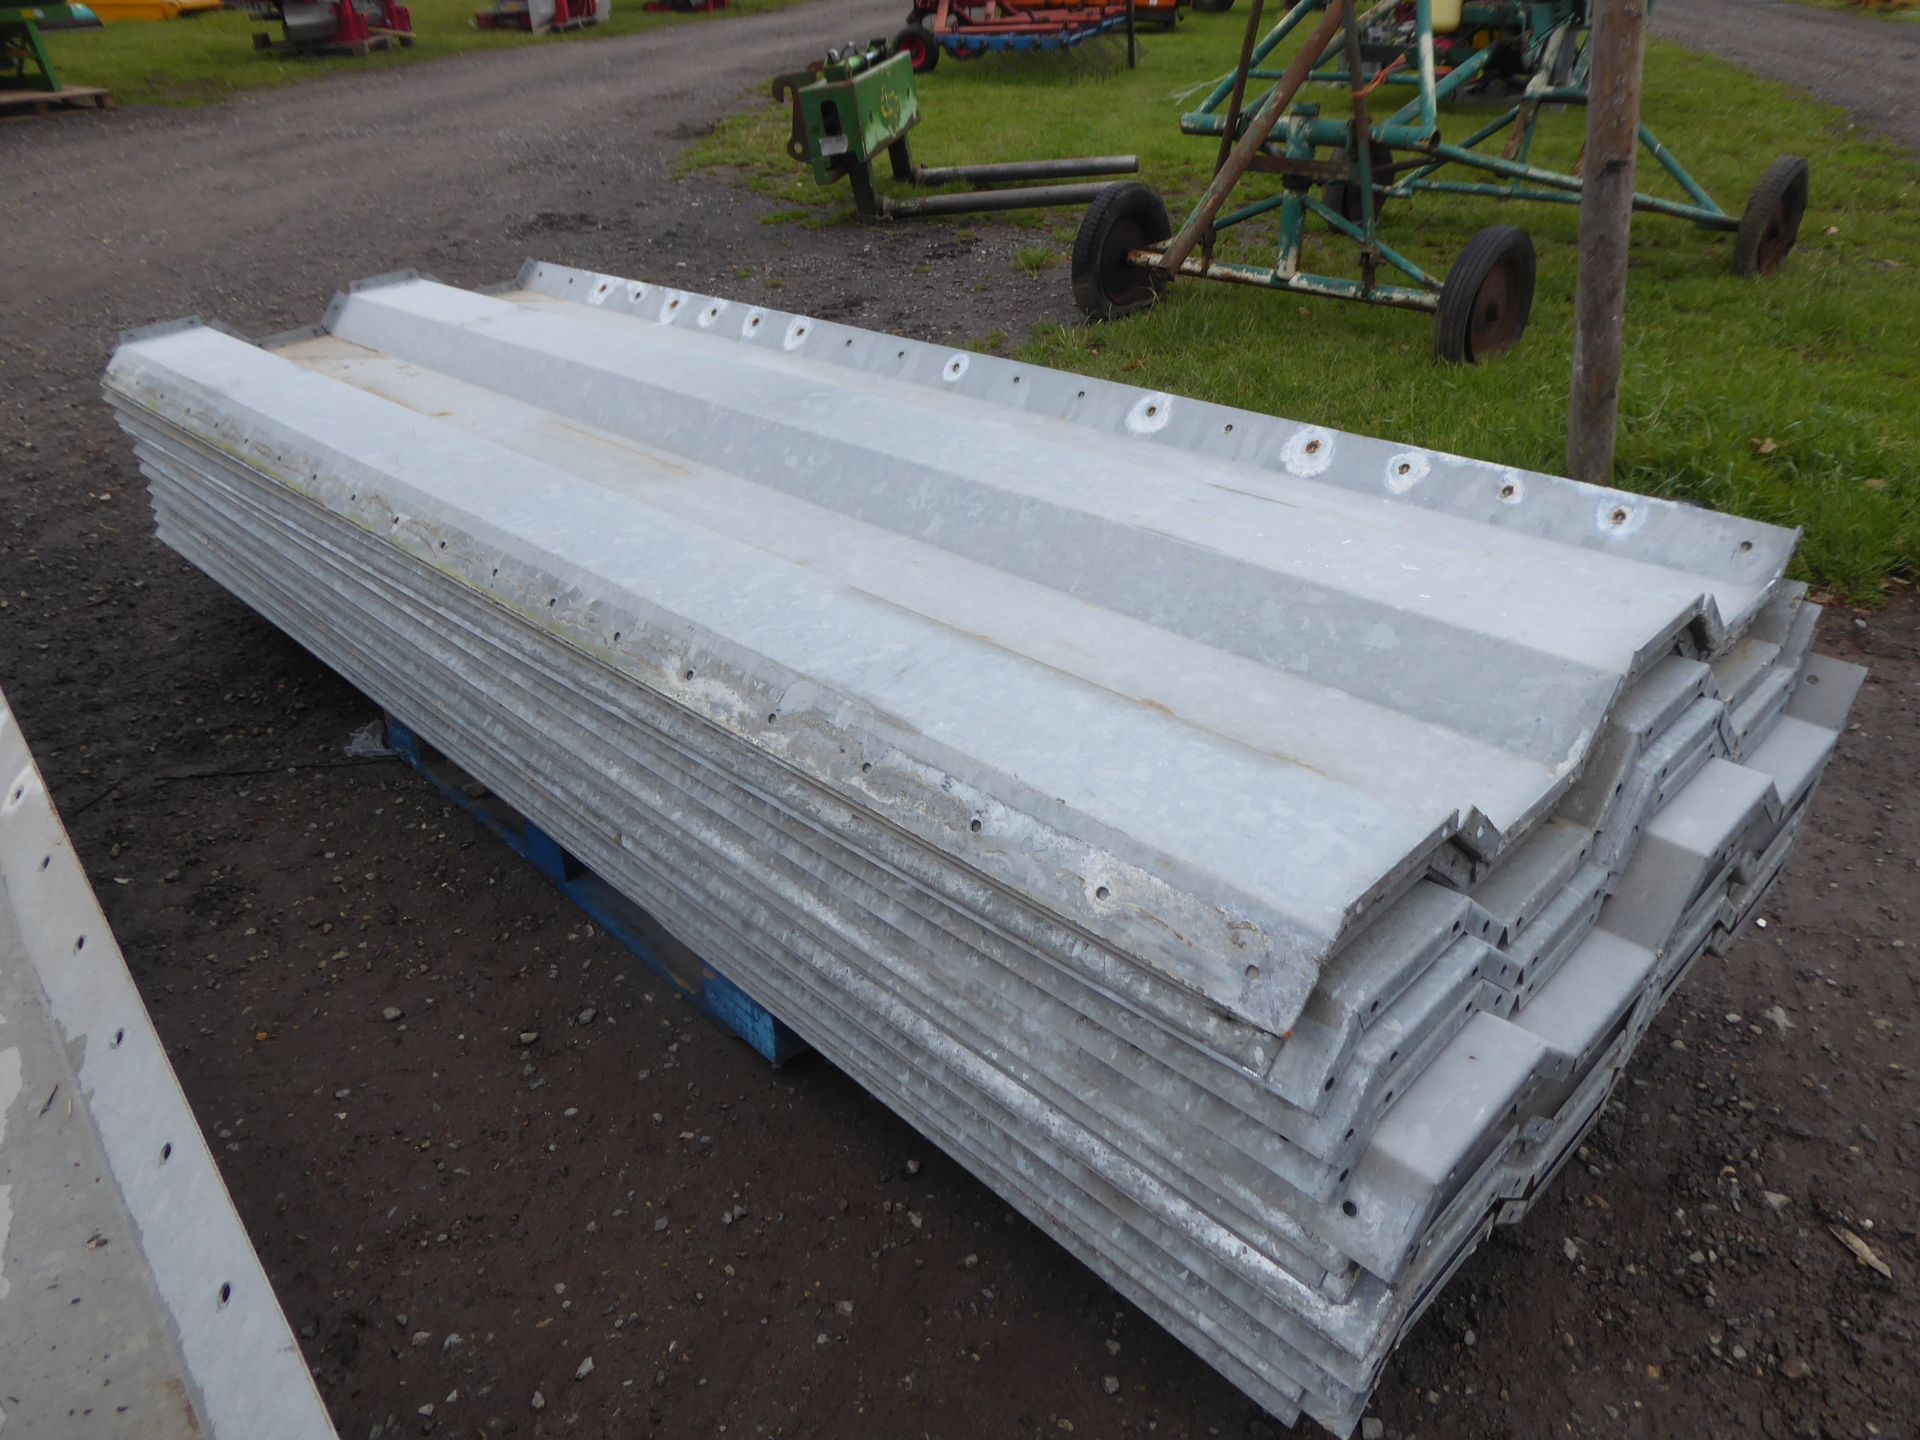 Steel grain walling, 3mm thick, covers approximately 10x5